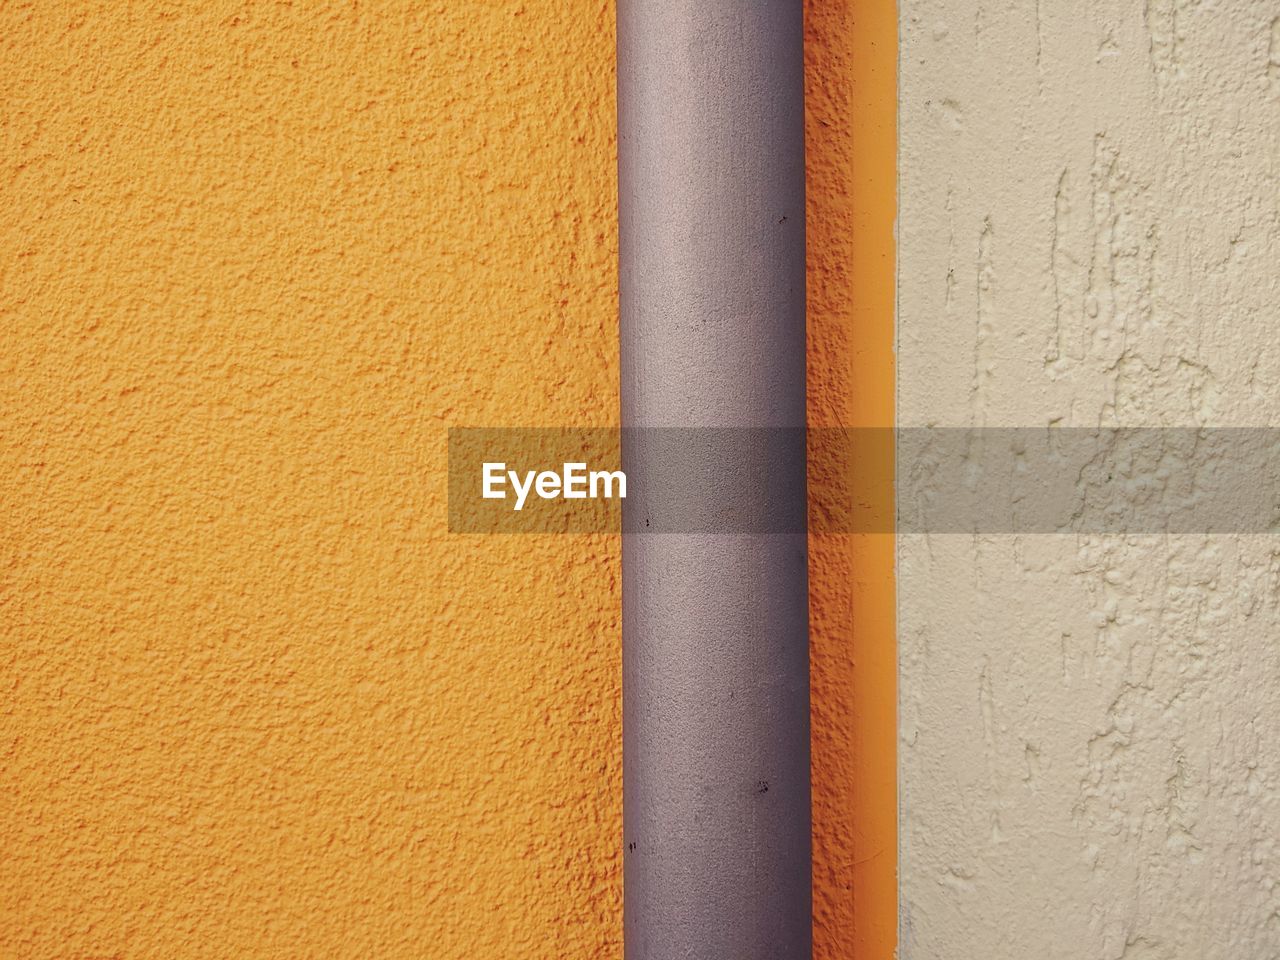 FULL FRAME SHOT OF YELLOW WALL WITH ORANGE